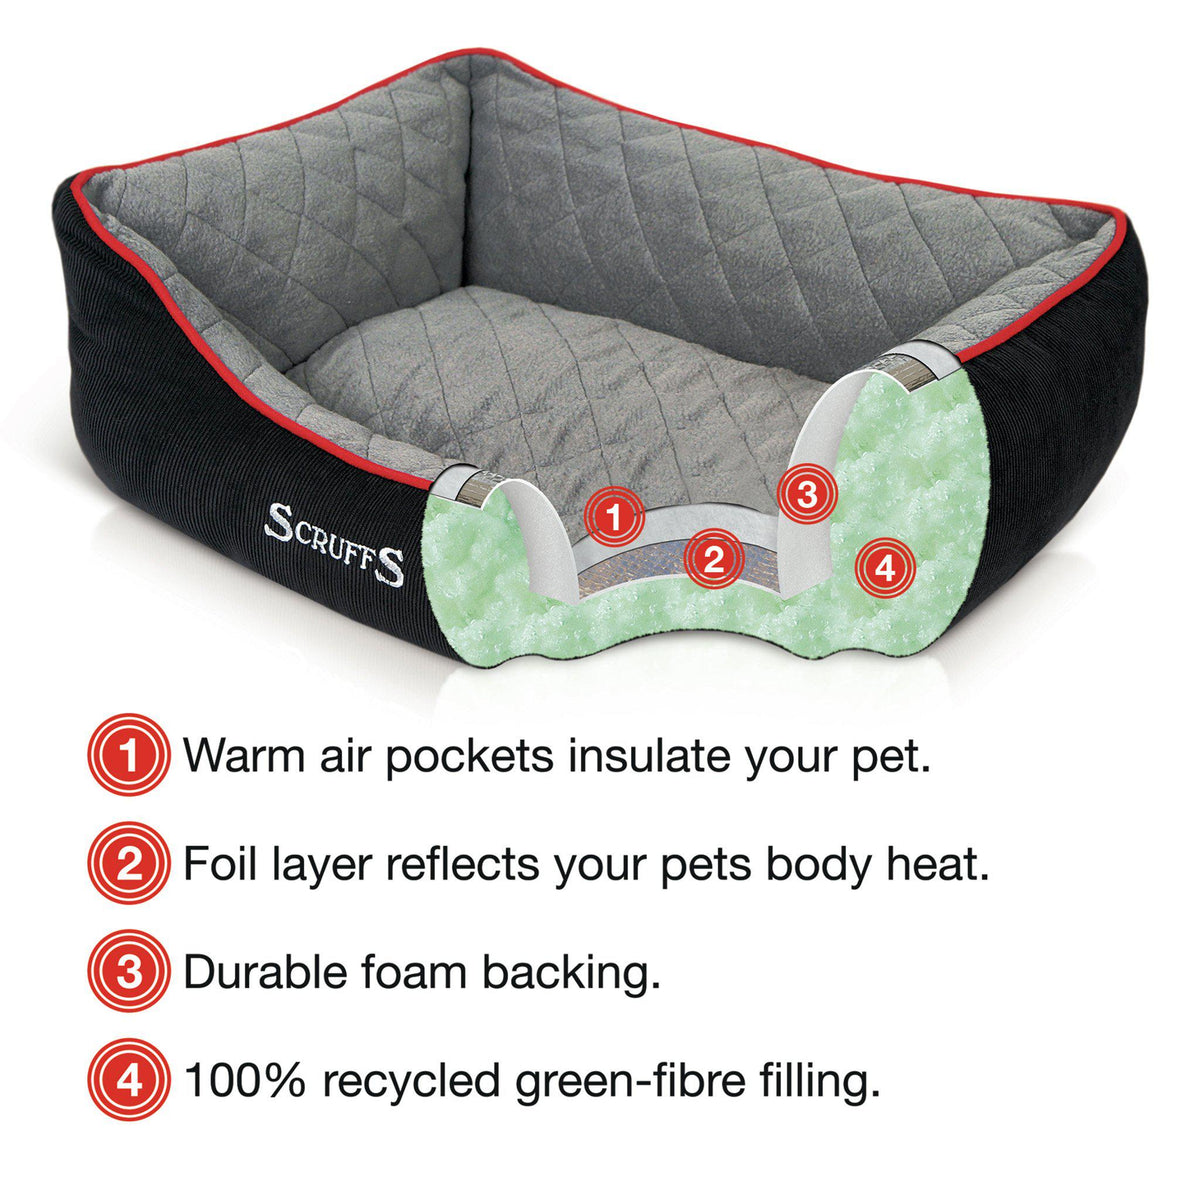 Scruffs Thermal Box Bed - ComfyPet Products